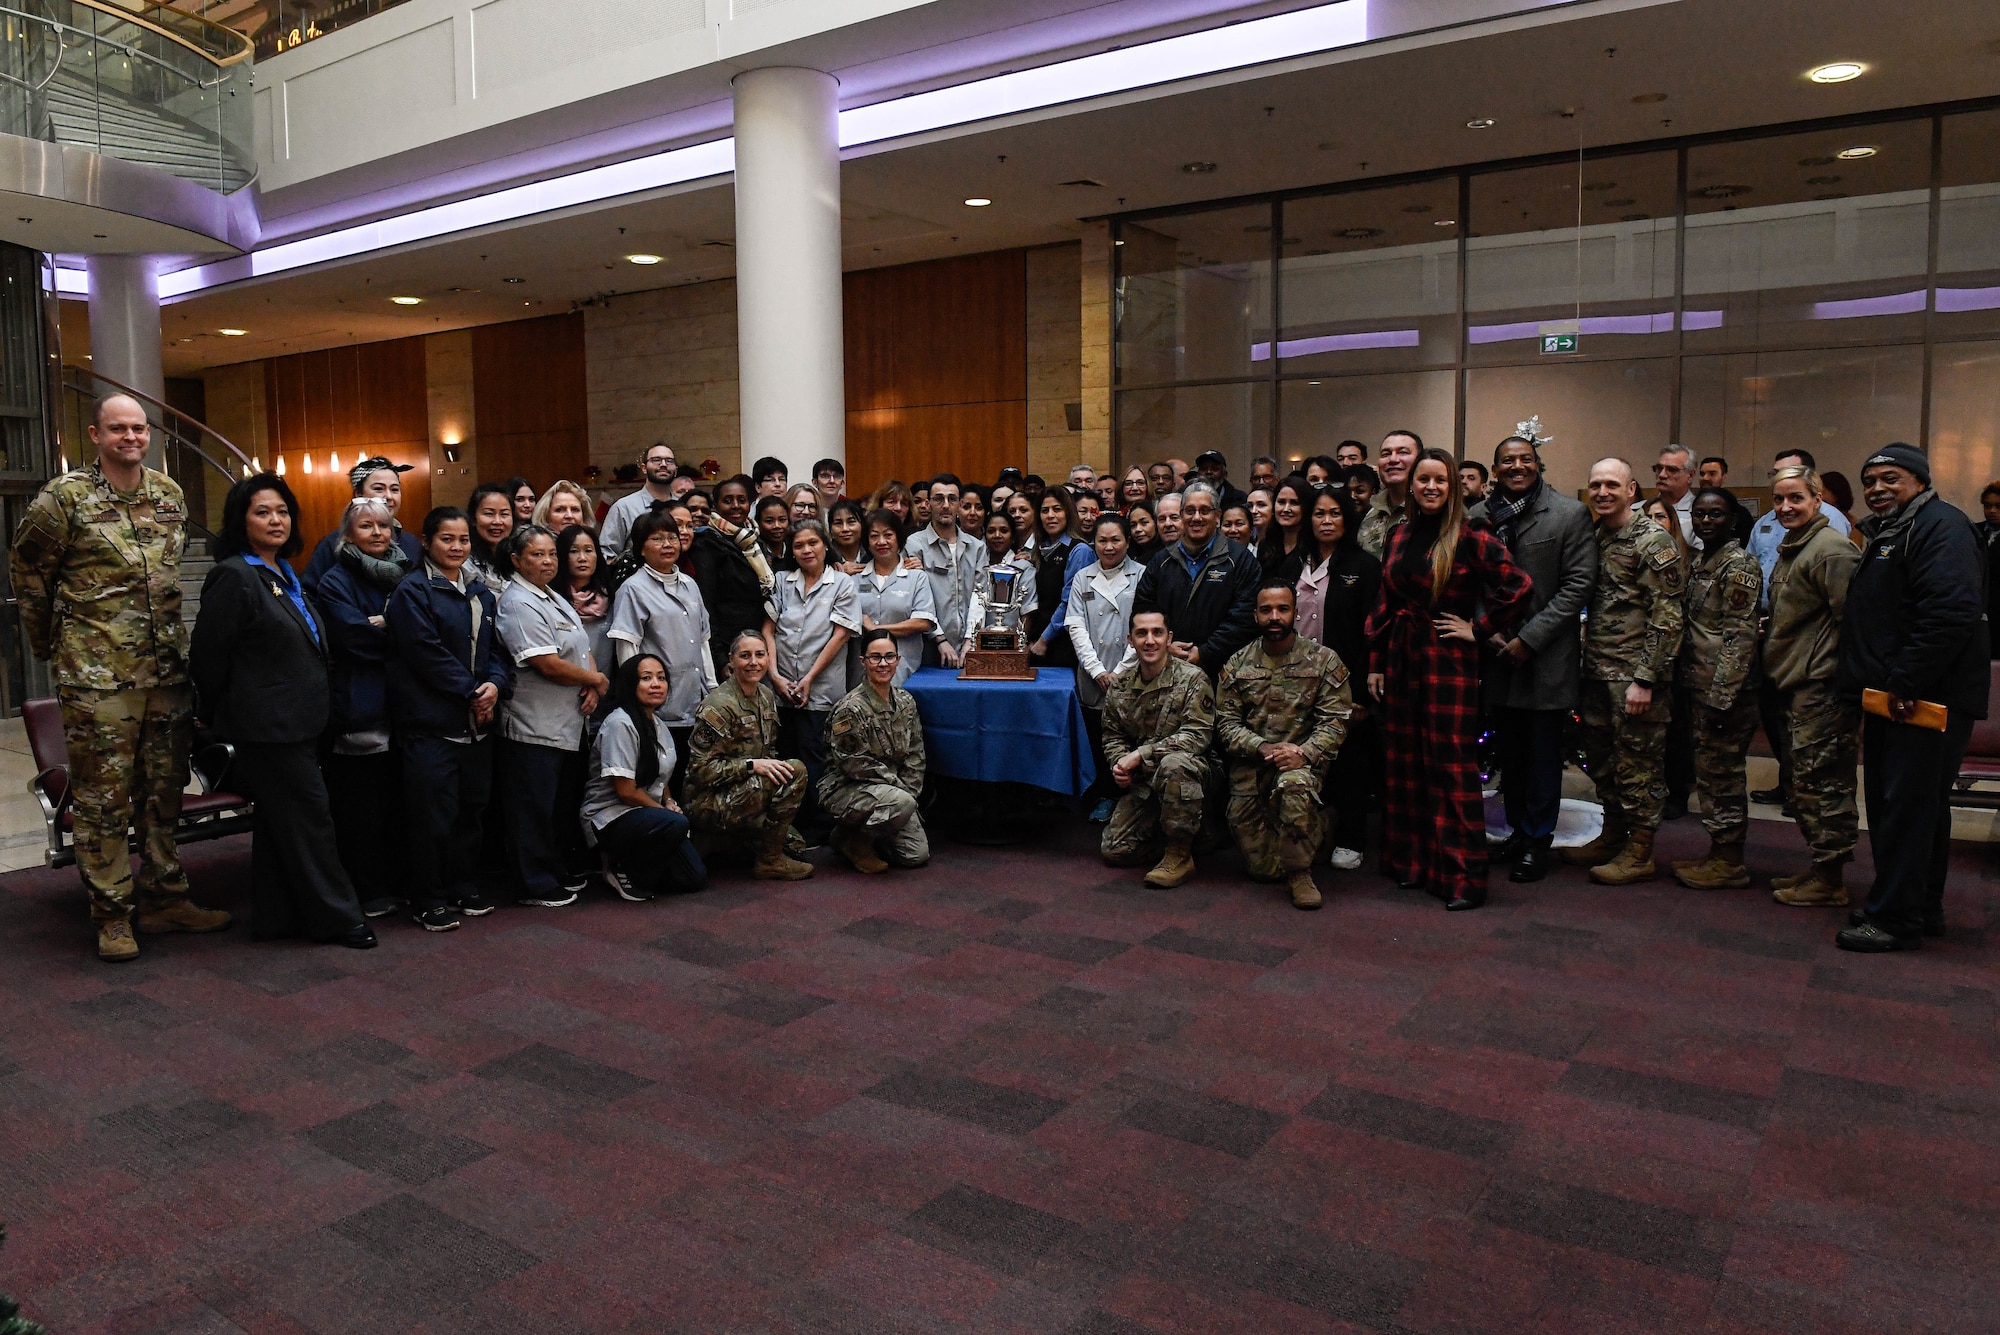 Staff from the 786th Force Support Squadron Kaiserslautern Military Community lodging team and other ceremony attendees pose with the 2022 Air Force Innkeeper Award at Ramstein Air Base, Germany, Dec. 12, 2022. This is the second time since 2020 KMC lodging has won the award. (U.S. Air Force photo by Airman 1st Class Kaitlyn Oiler)